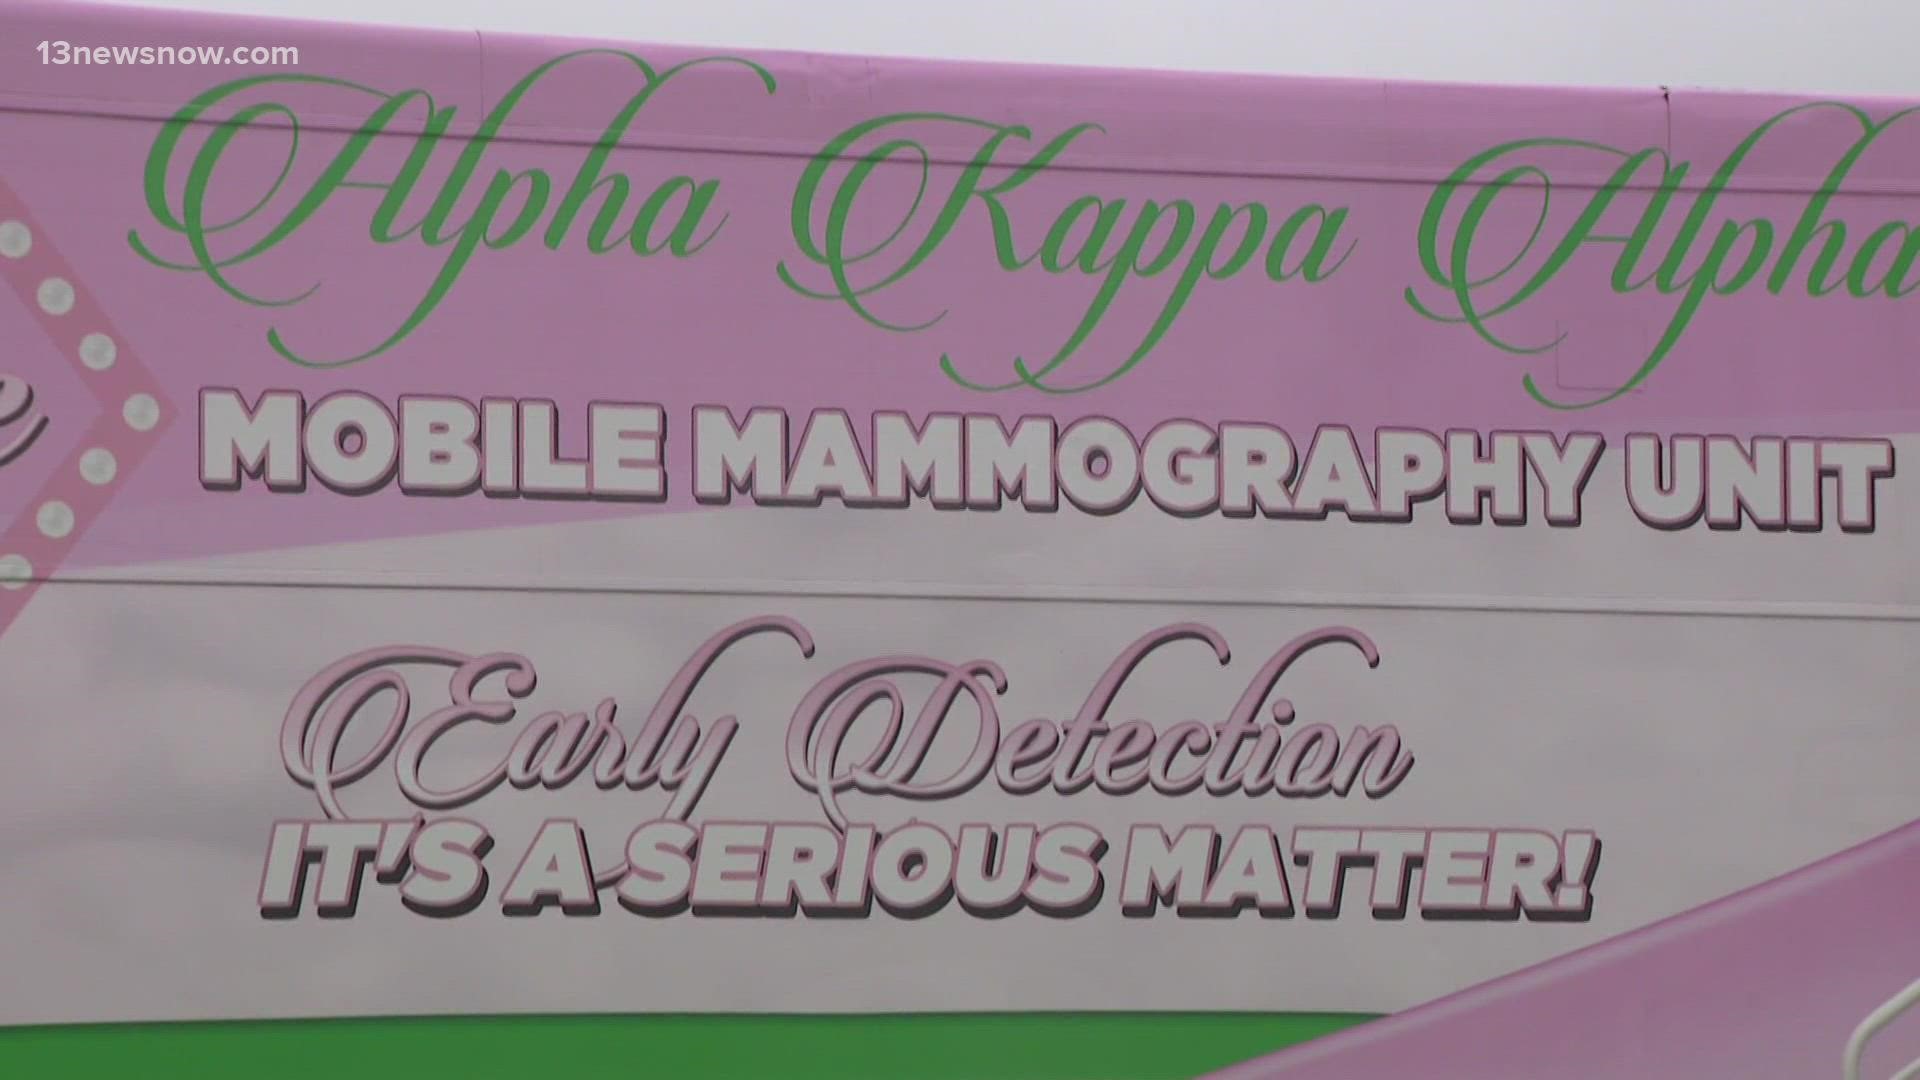 Breast Cancer Awareness Month is months away but  Alpha Kappa Alpha Sorority, Incorporated is reminding you to get screened no matter the month.